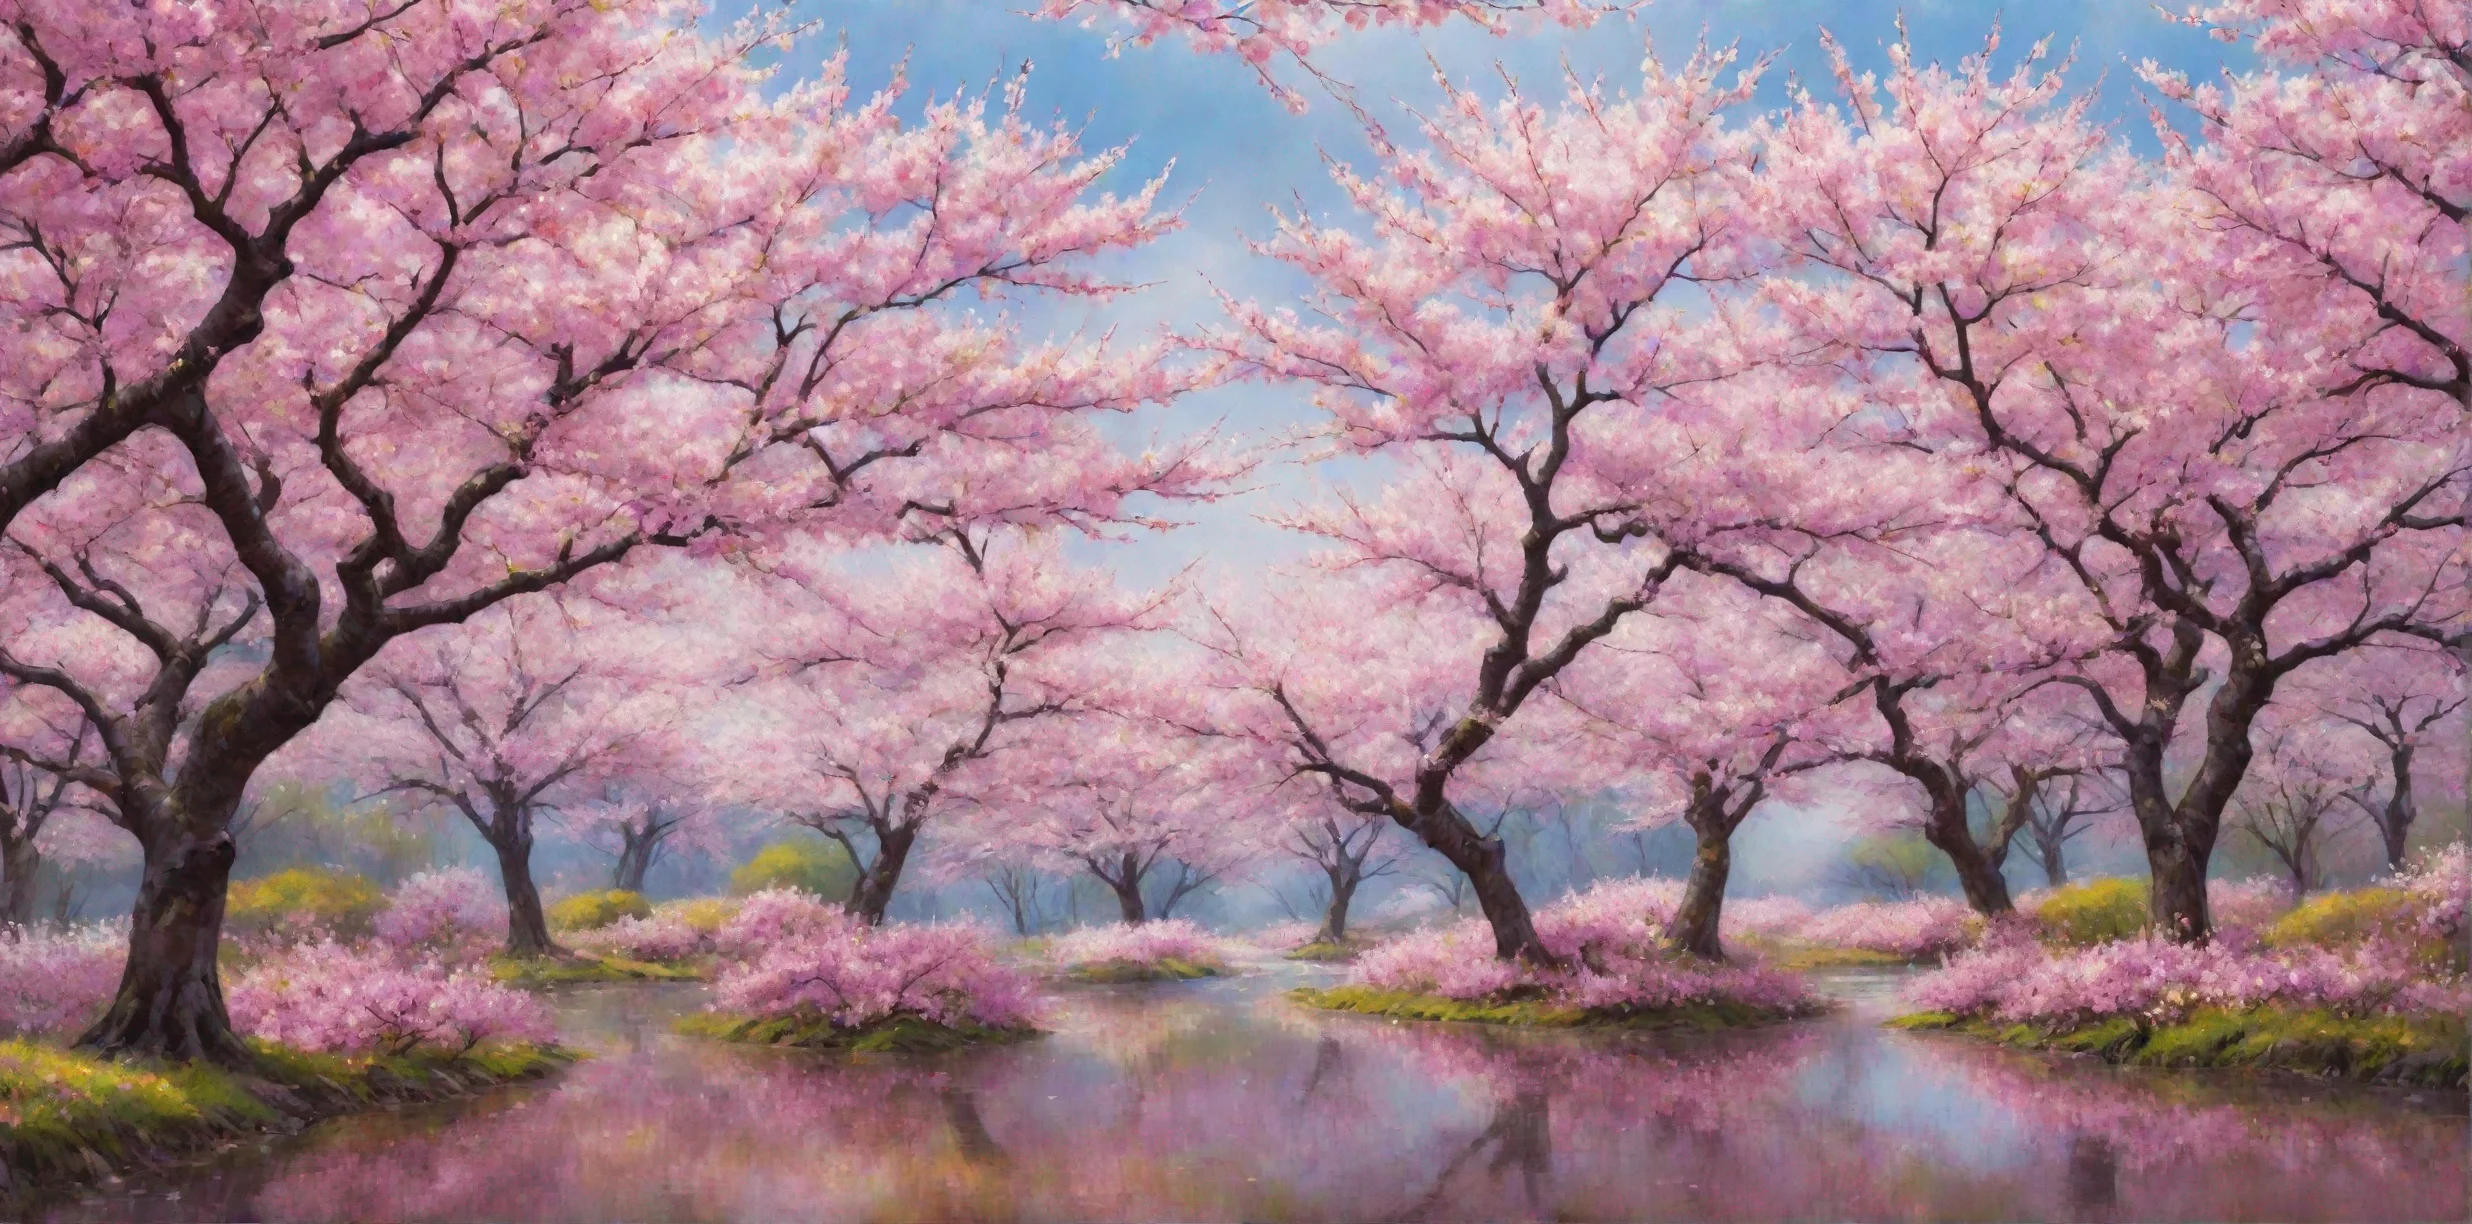 aiartistic epic cherry blossom bright magical